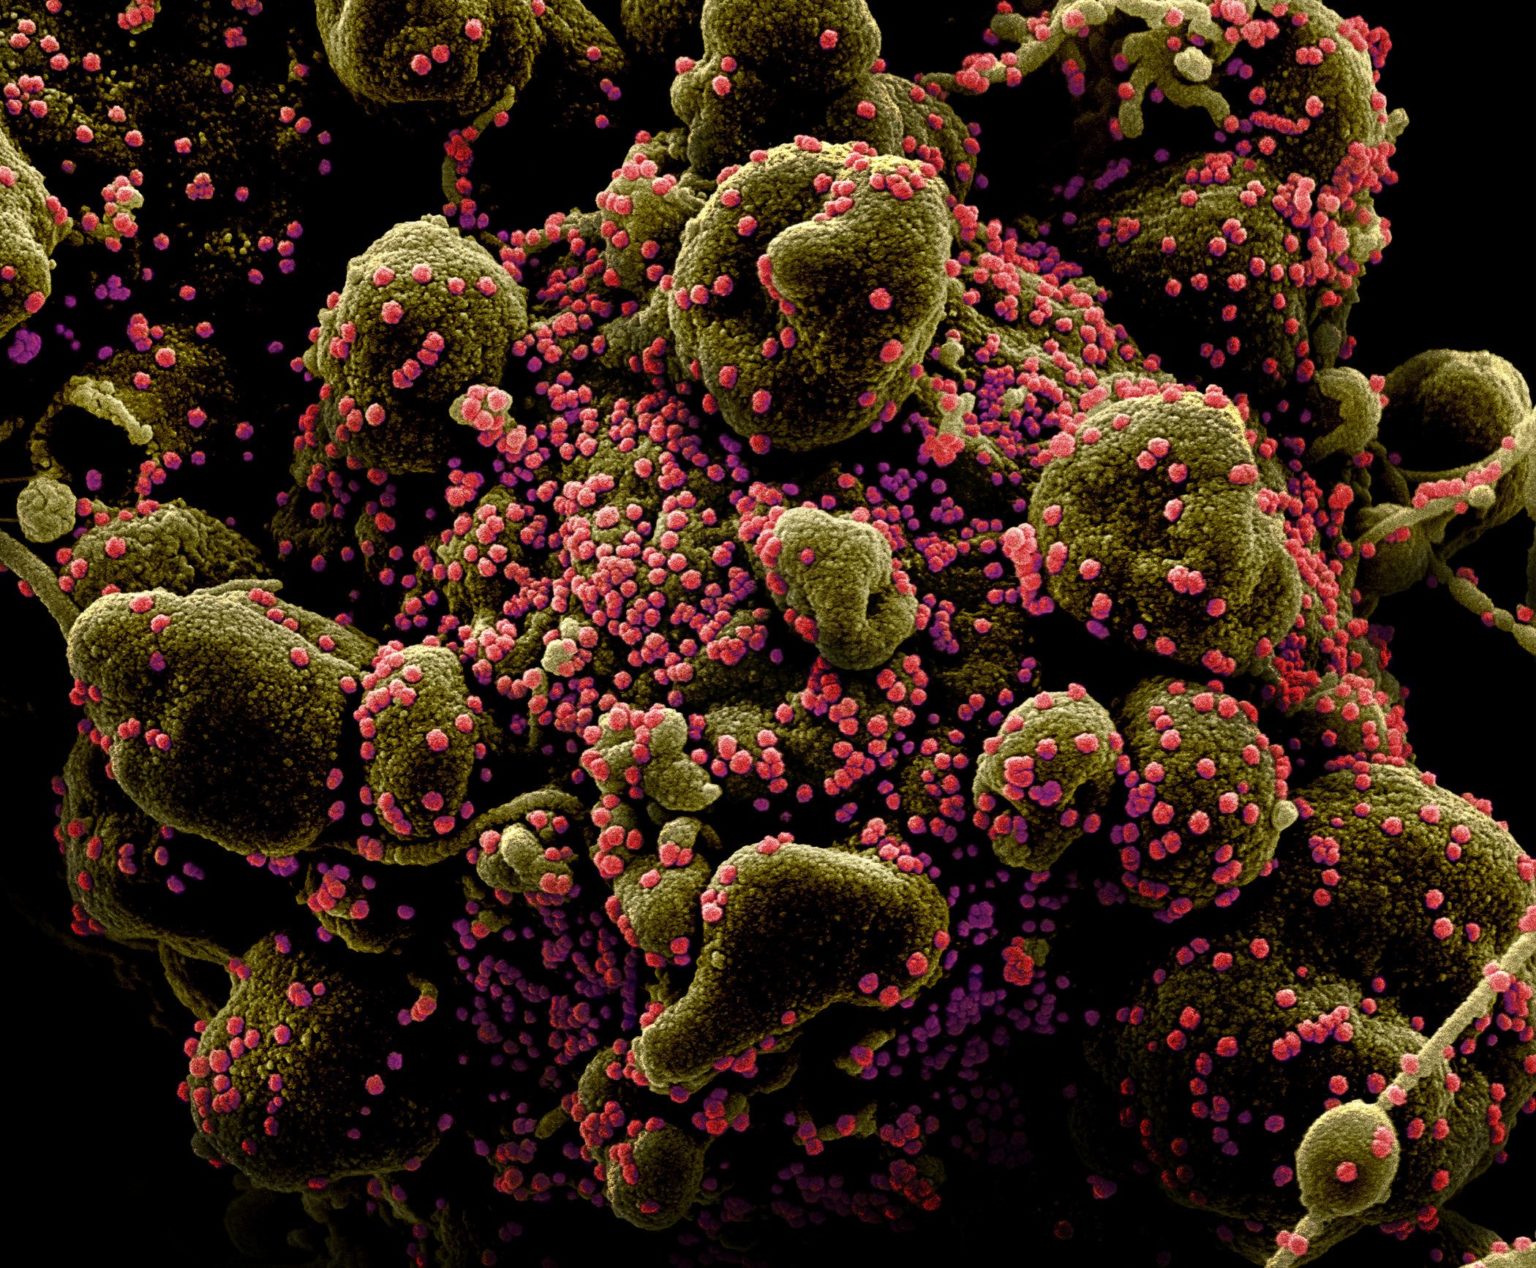 FILE PHOTO: Colorized scanning electron micrograph of an apoptotic cell (greenish brown) heavily infected with SARS-COV-2 virus particles (pink), also known as novel coronavirus, isolated from a patient sample. Image captured and color-enhanced at the NIAID Integrated Research Facility (IRF) in Fort Detrick, Maryland. National Institute of Allergy and Infectious Diseases, NIH/Handout via REUTERS.